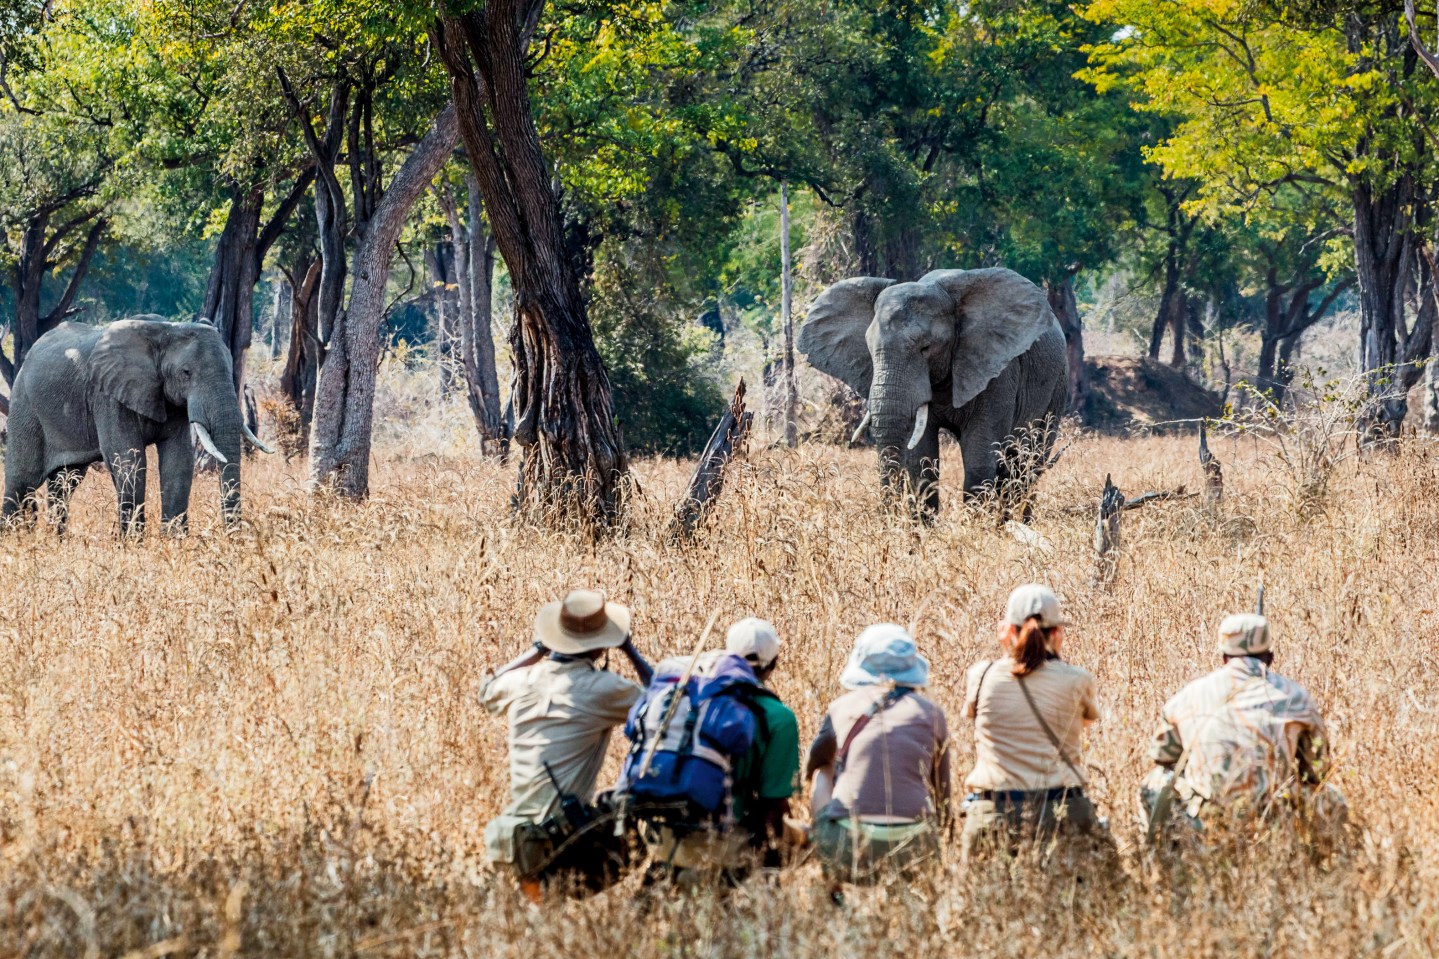 CLOSE ENCOUNTER Visitors cross paths with an elephant in Zambia’s South Luangwa National Park during a Remote Africa safari.<br />
Courtesy of Scott Ramsay/Remote Africa Safaris